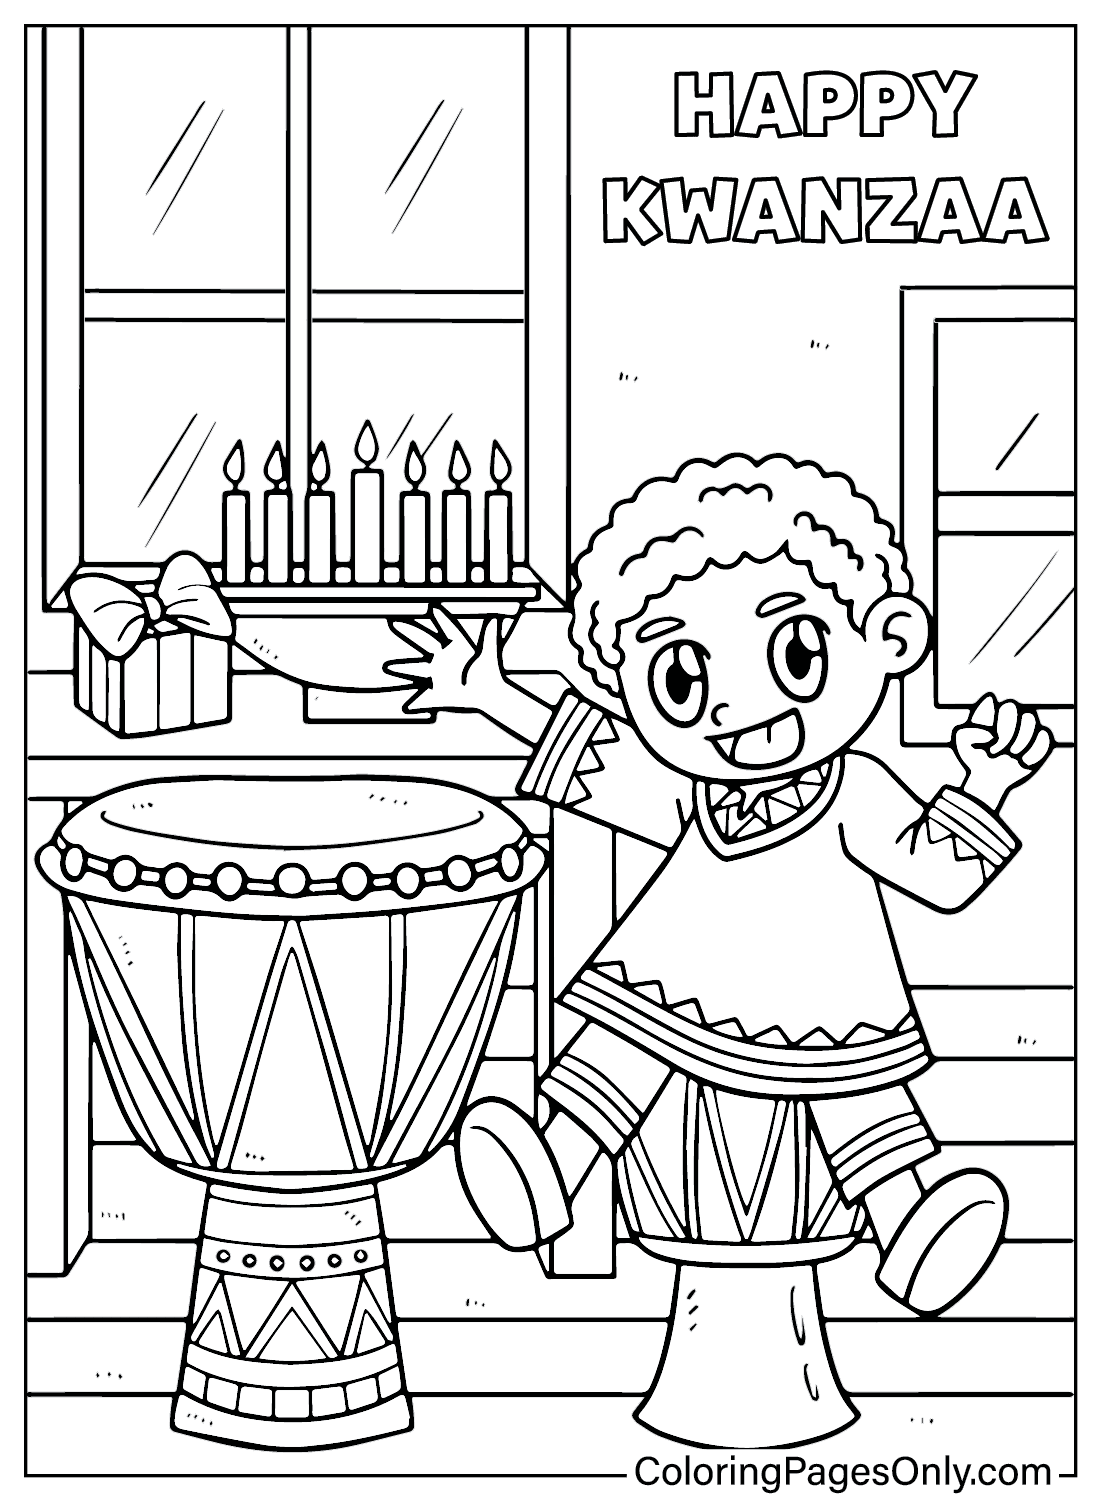 Kwanzaa Coloring Page Images from Kwanzaa